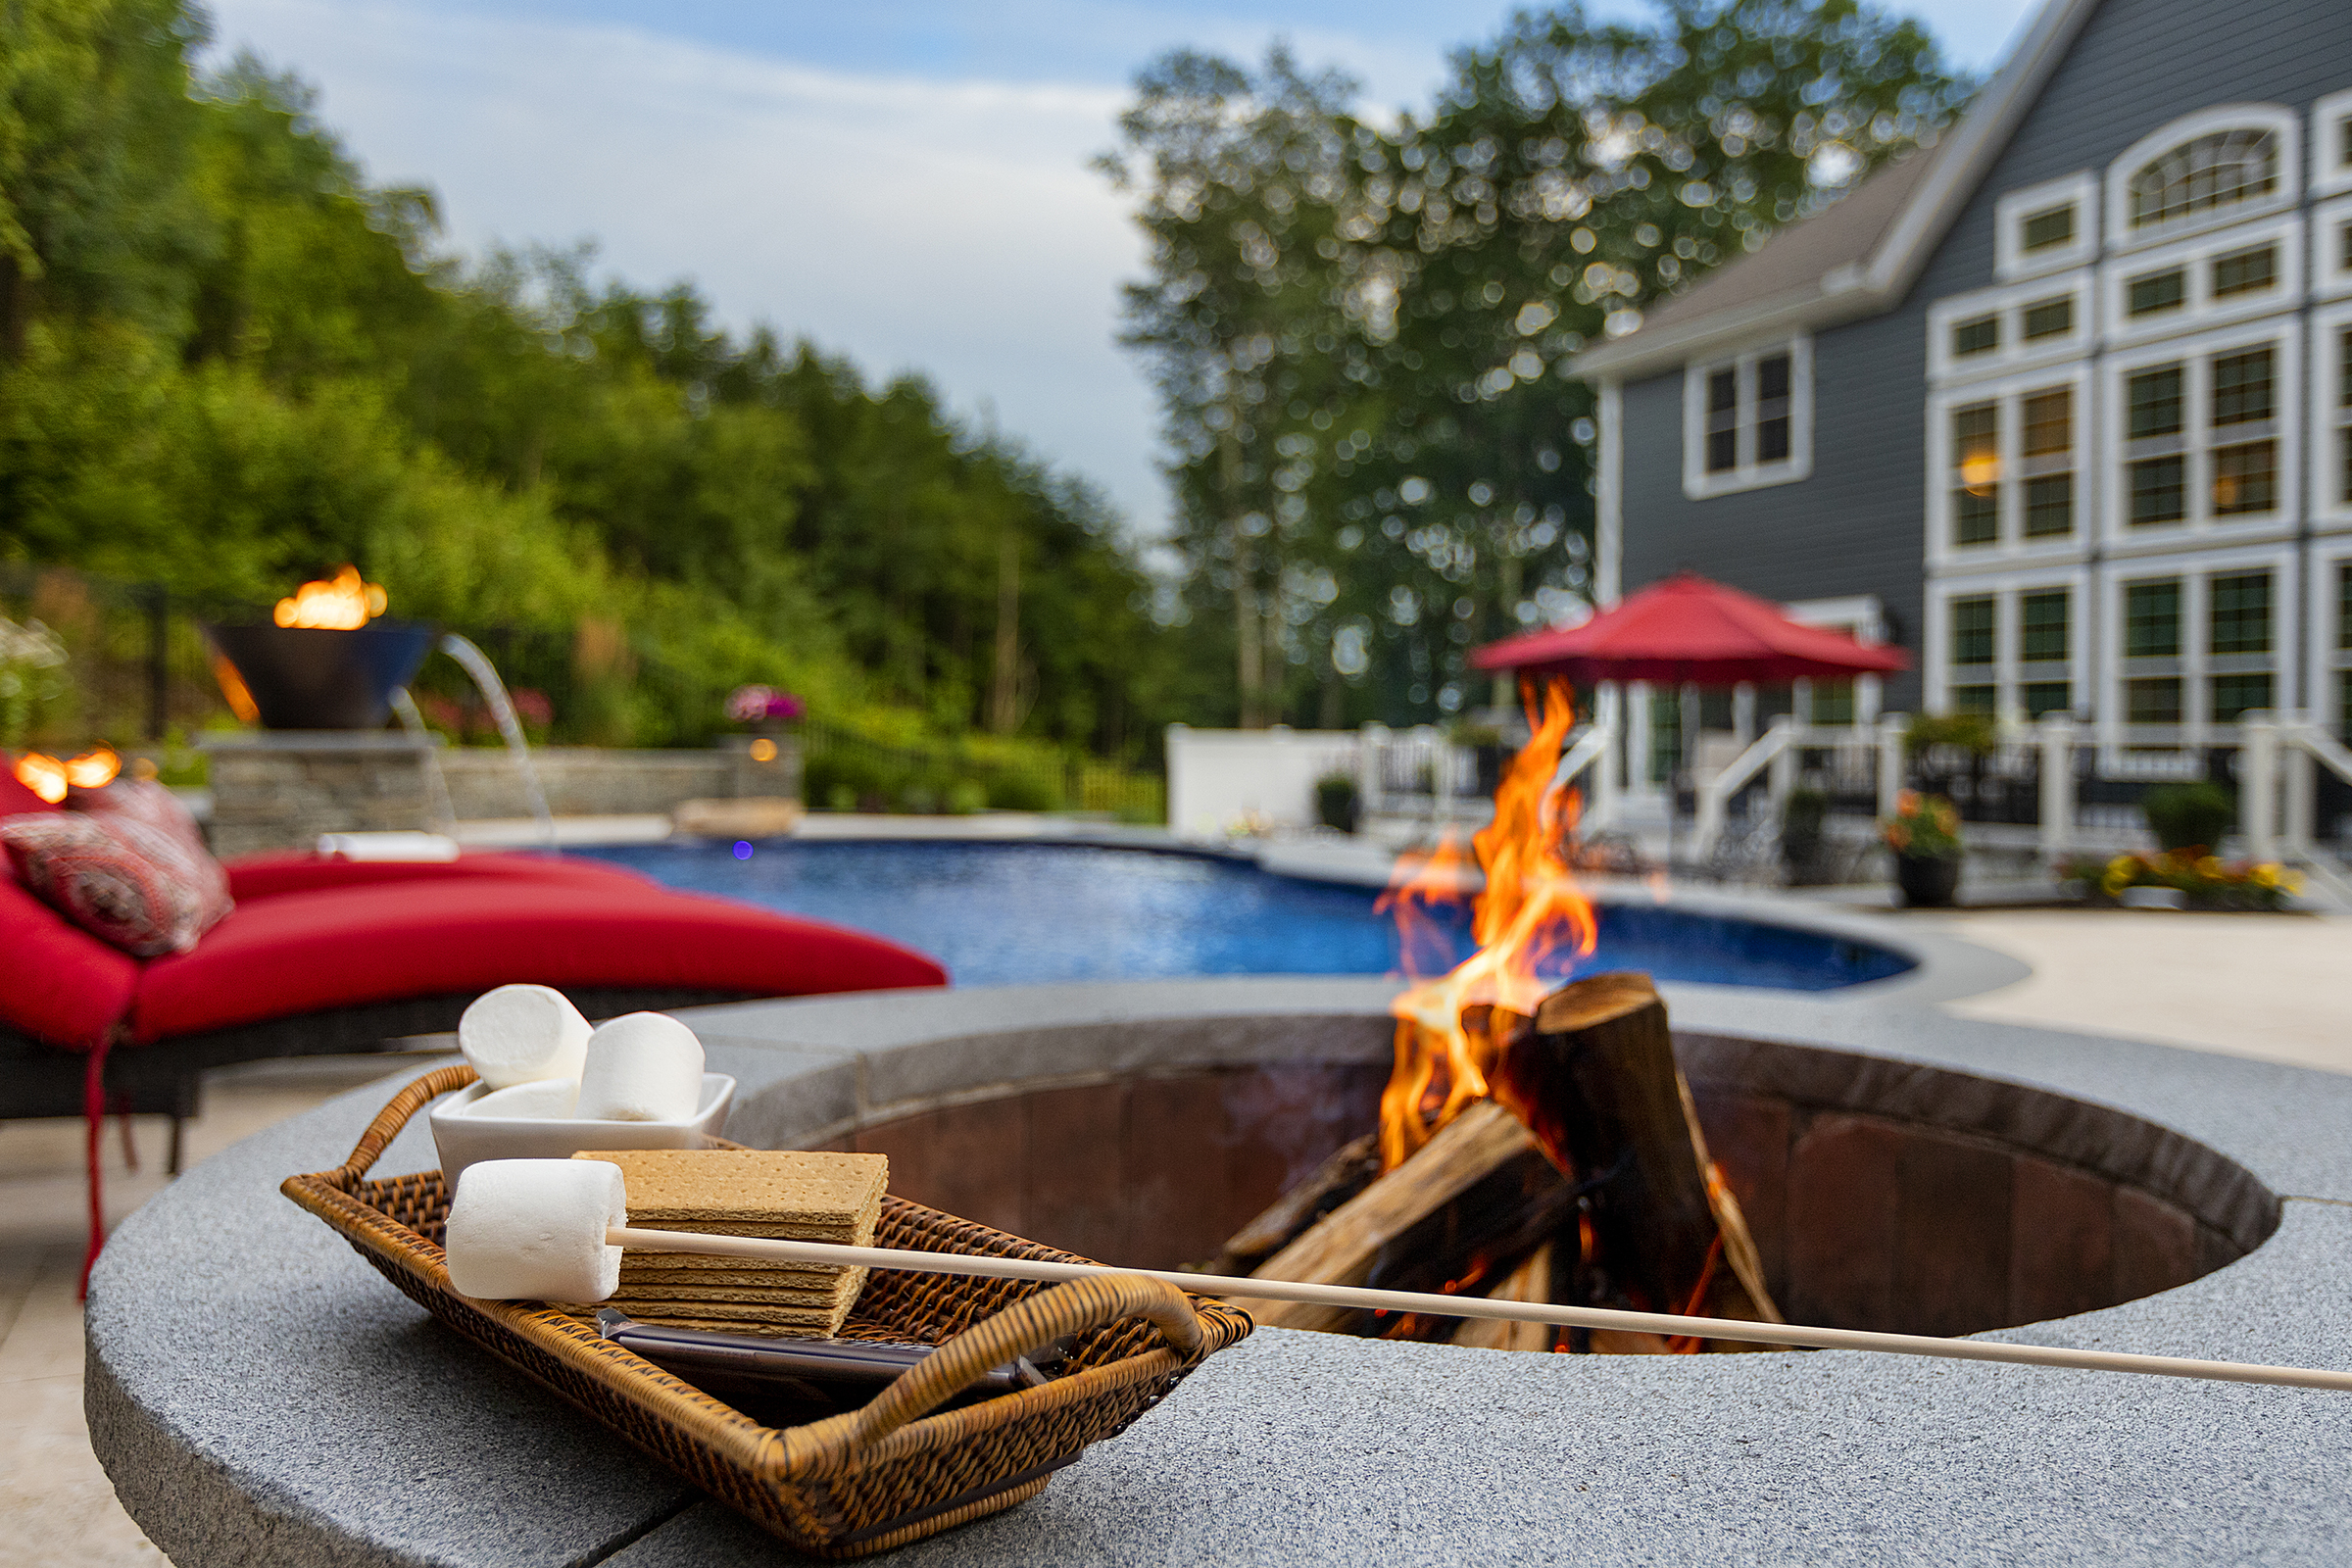 Sterling MA pool smore kit and fire pit